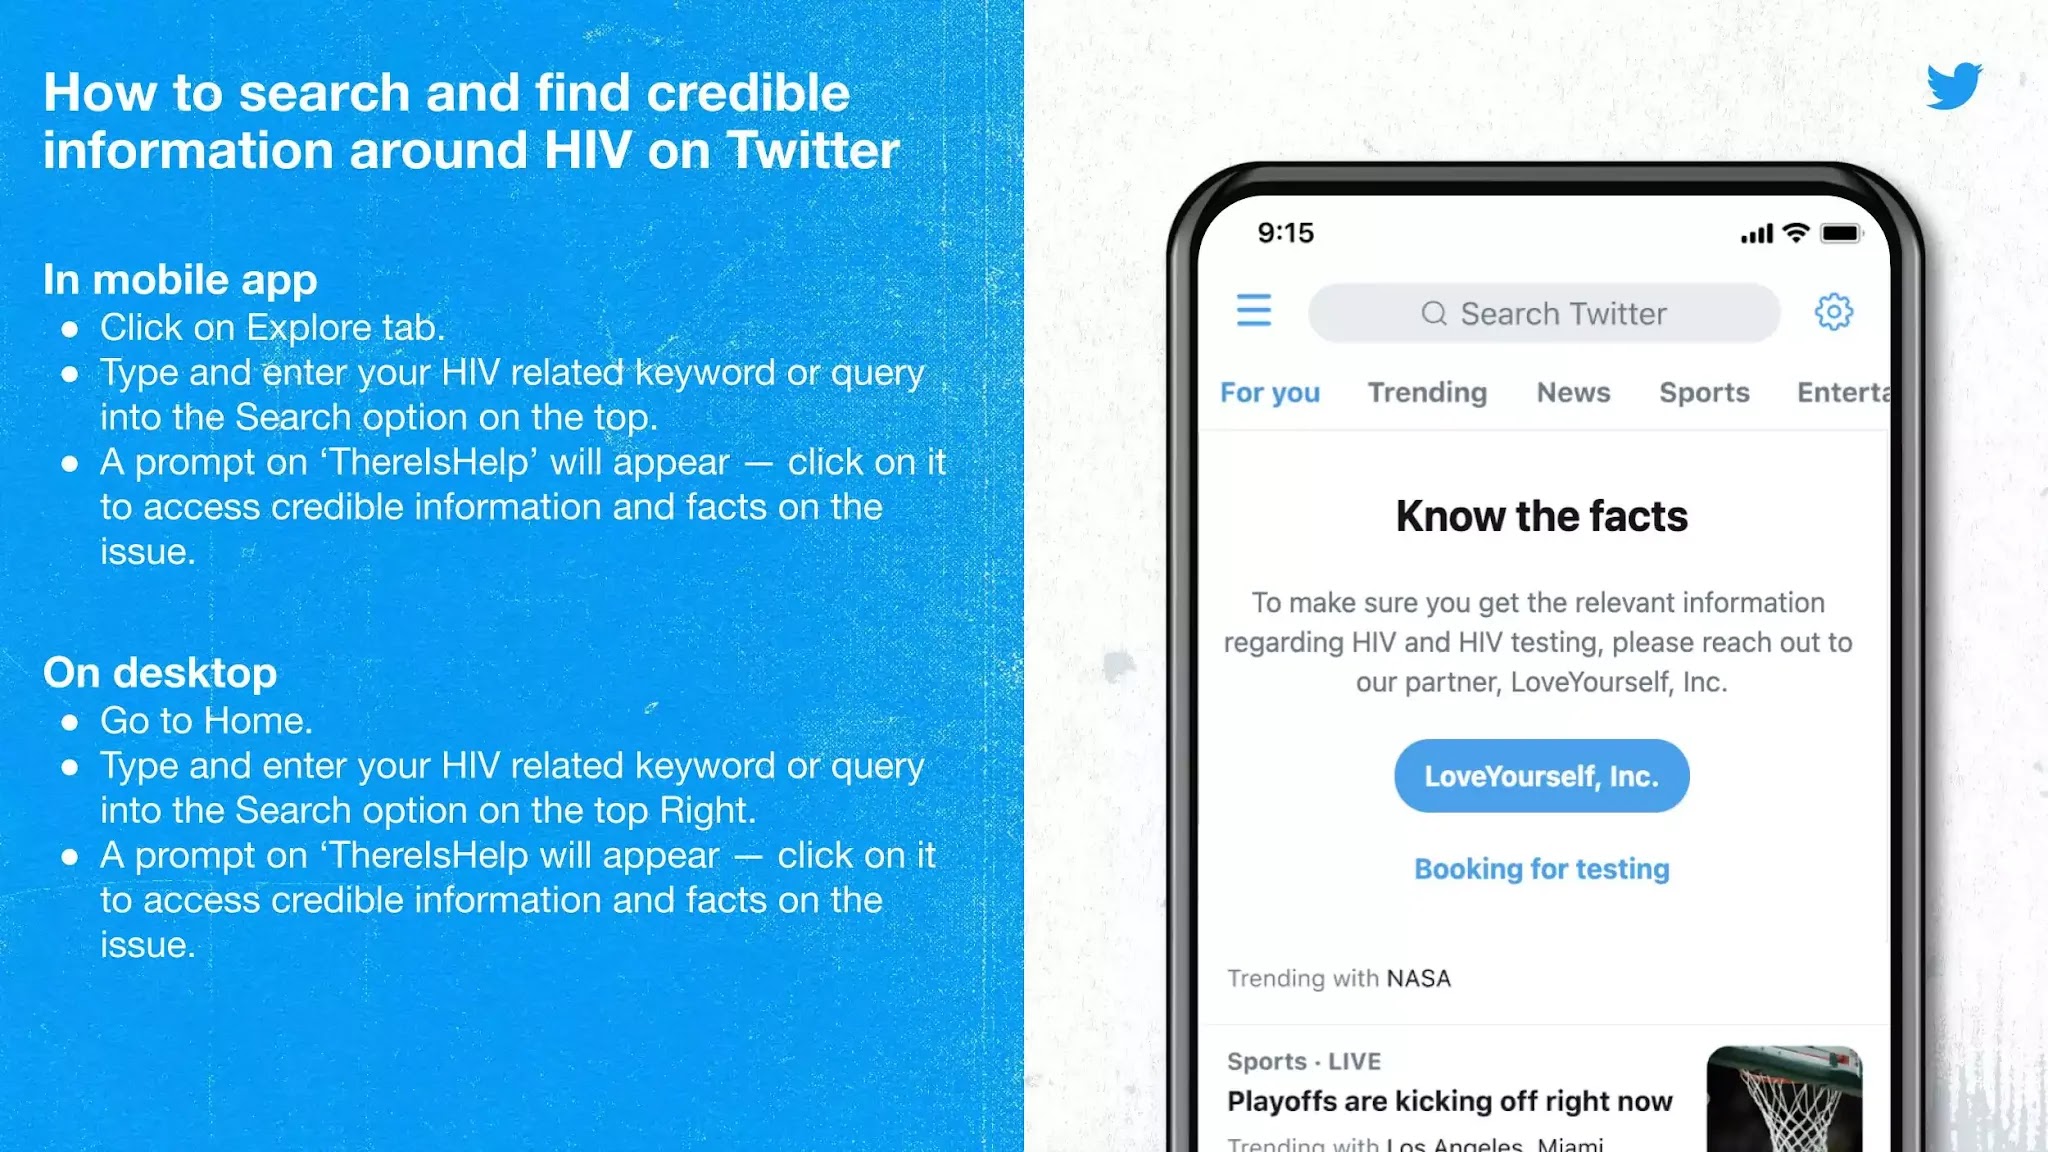 How to search and find credible information around HIV on Twitter